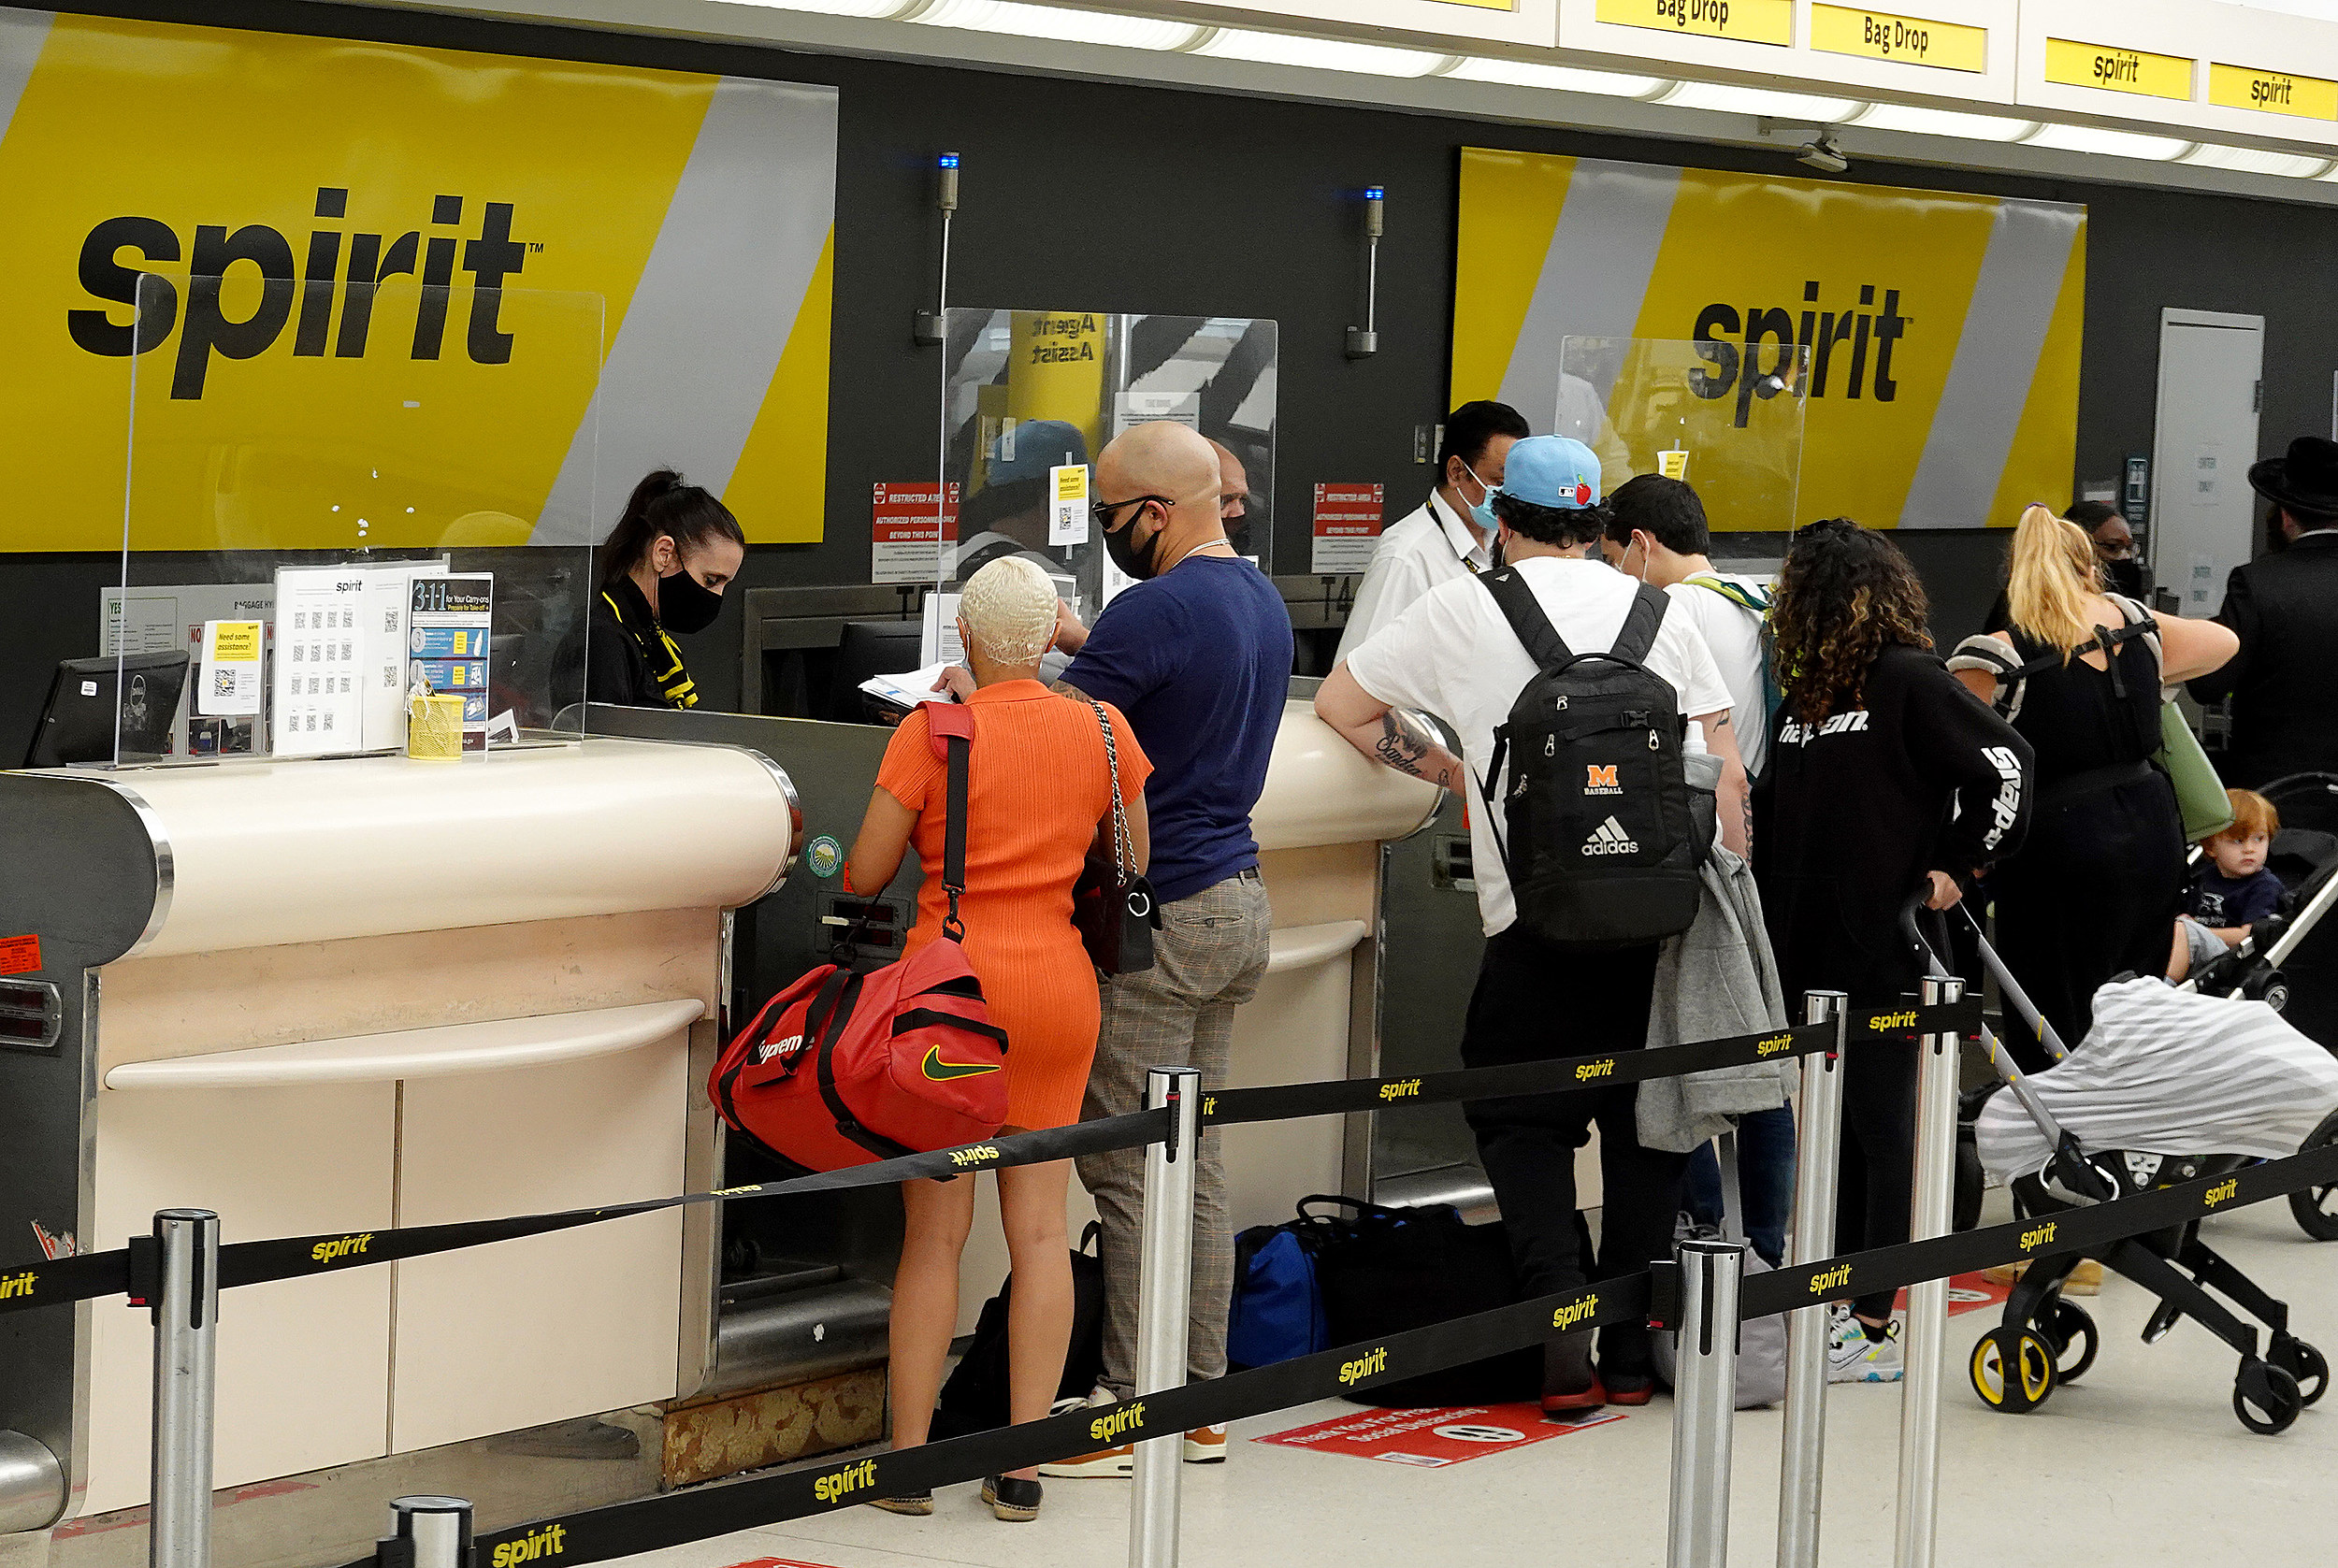 After 20 Years Spirit Airlines Finally Screwed Me Over